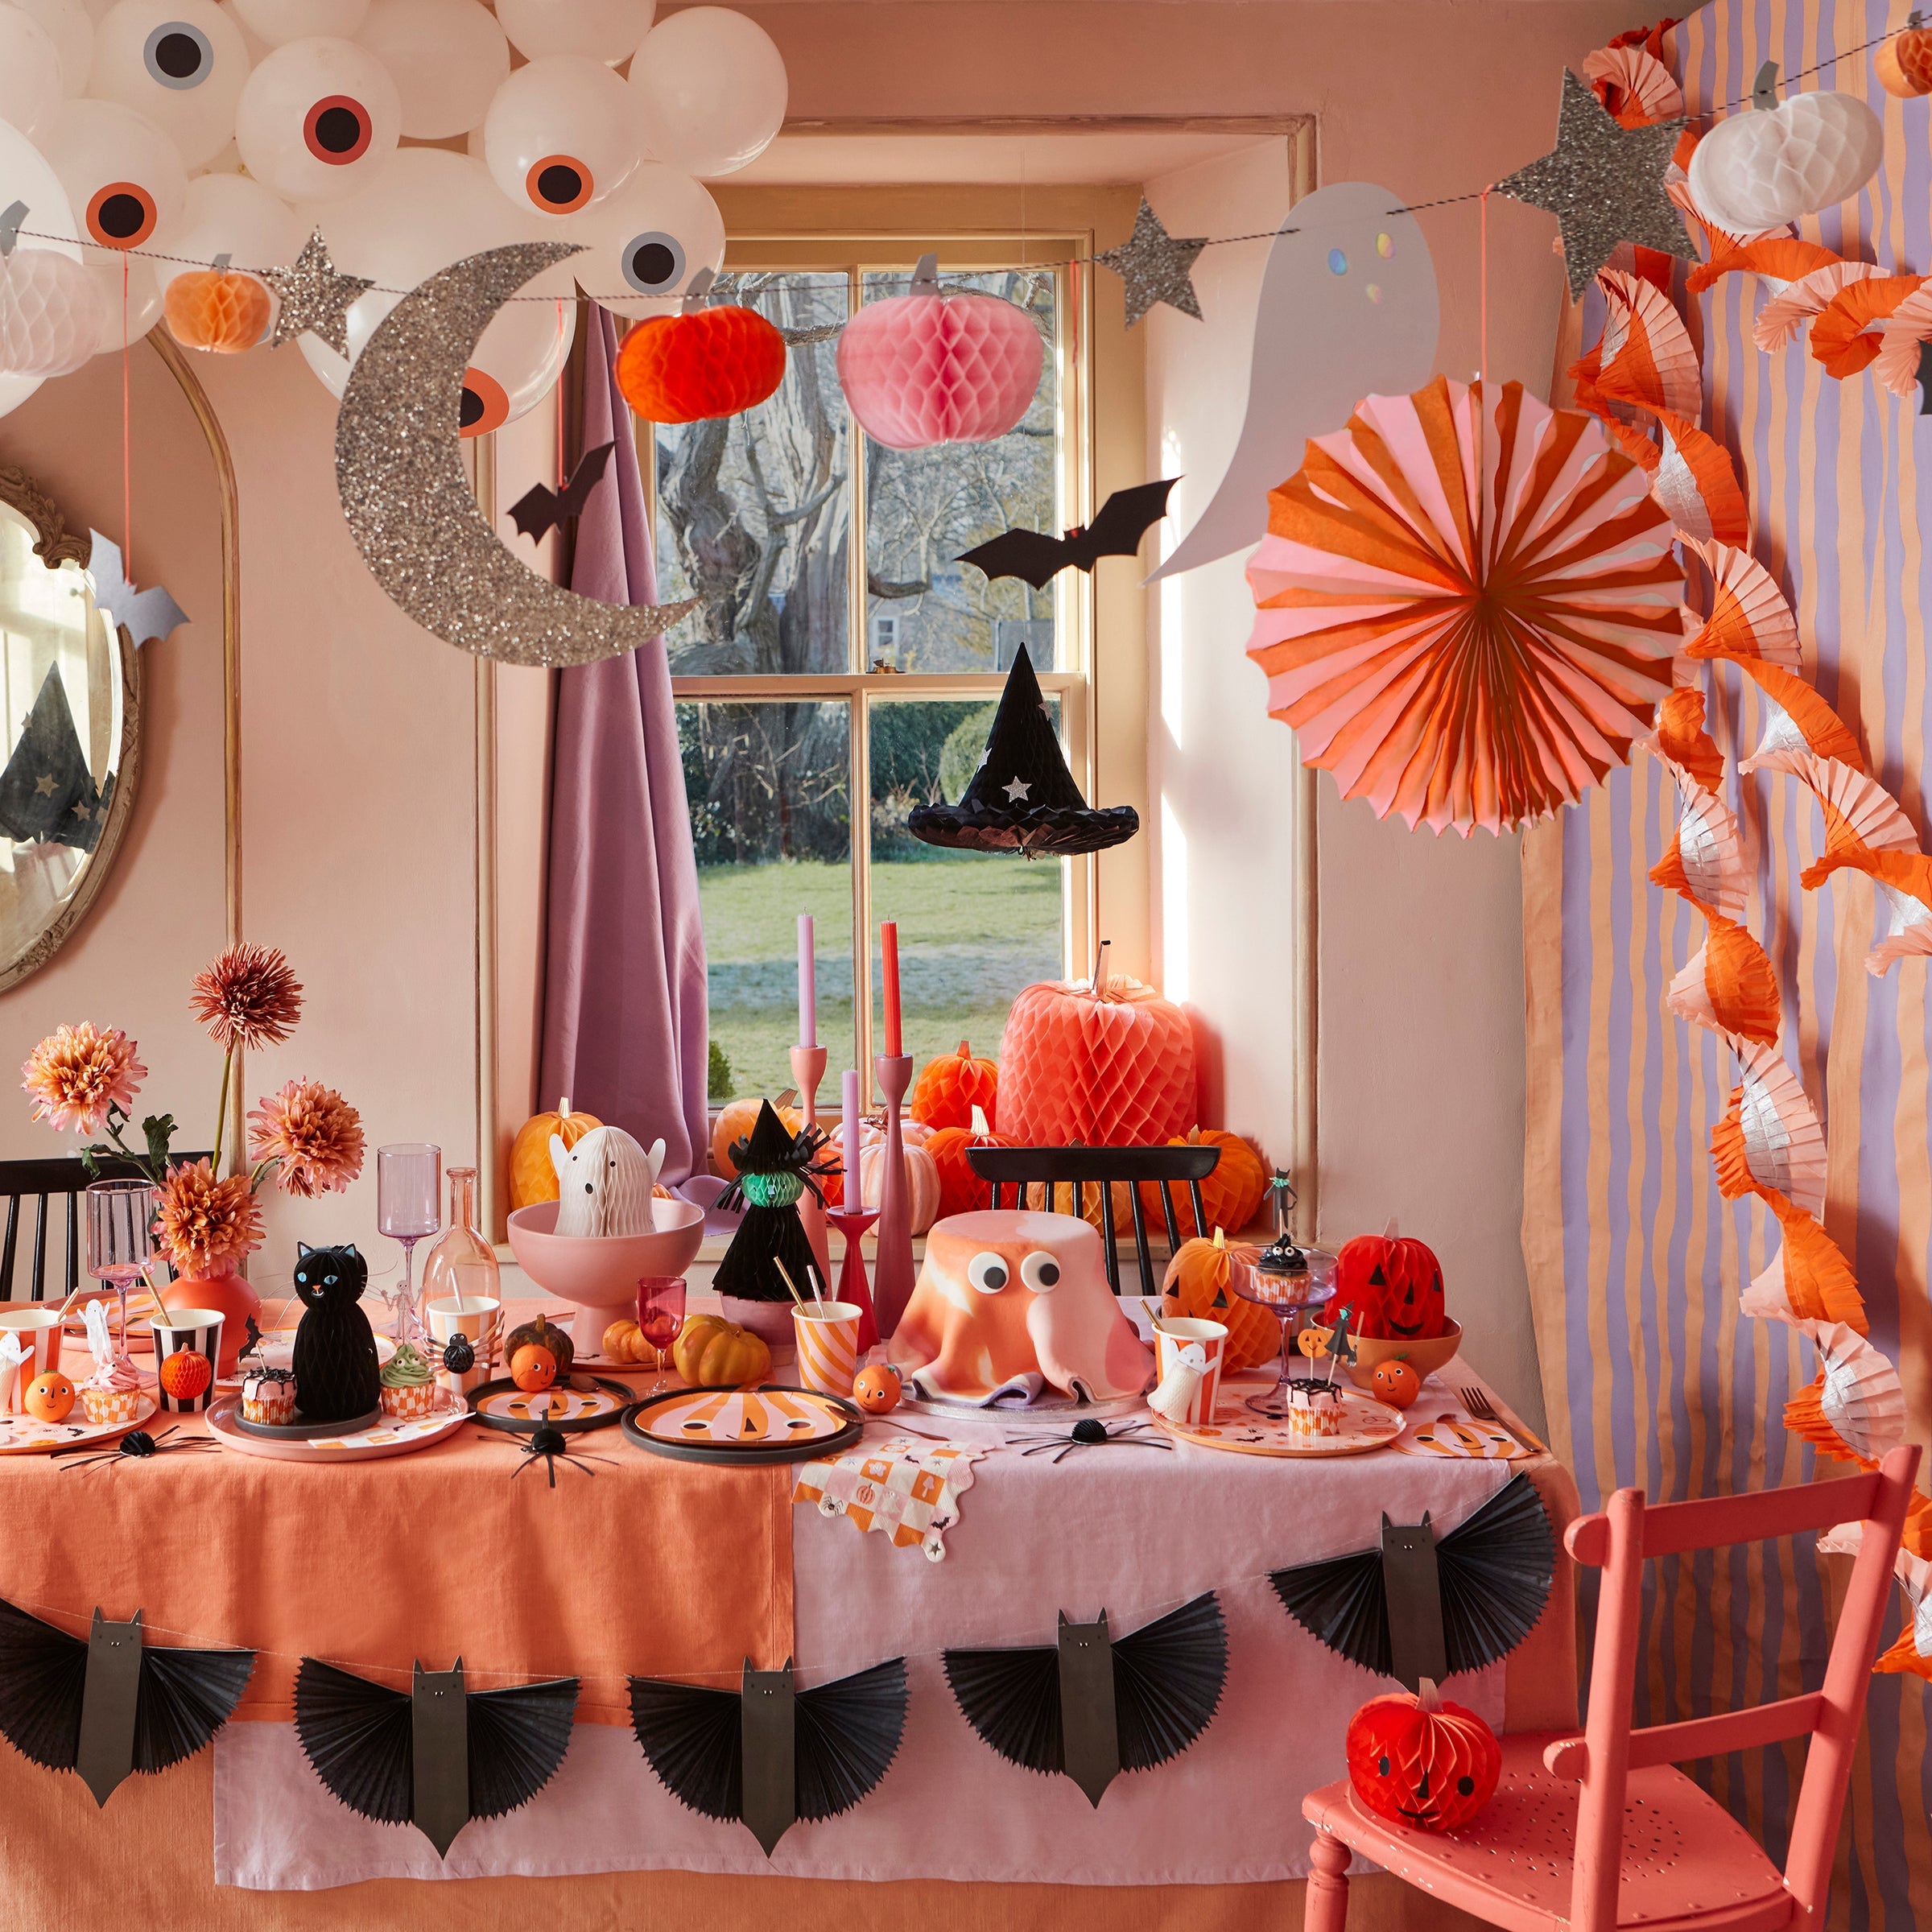 Our pastel garland is the perfect paper garland for a kids Halloween party.